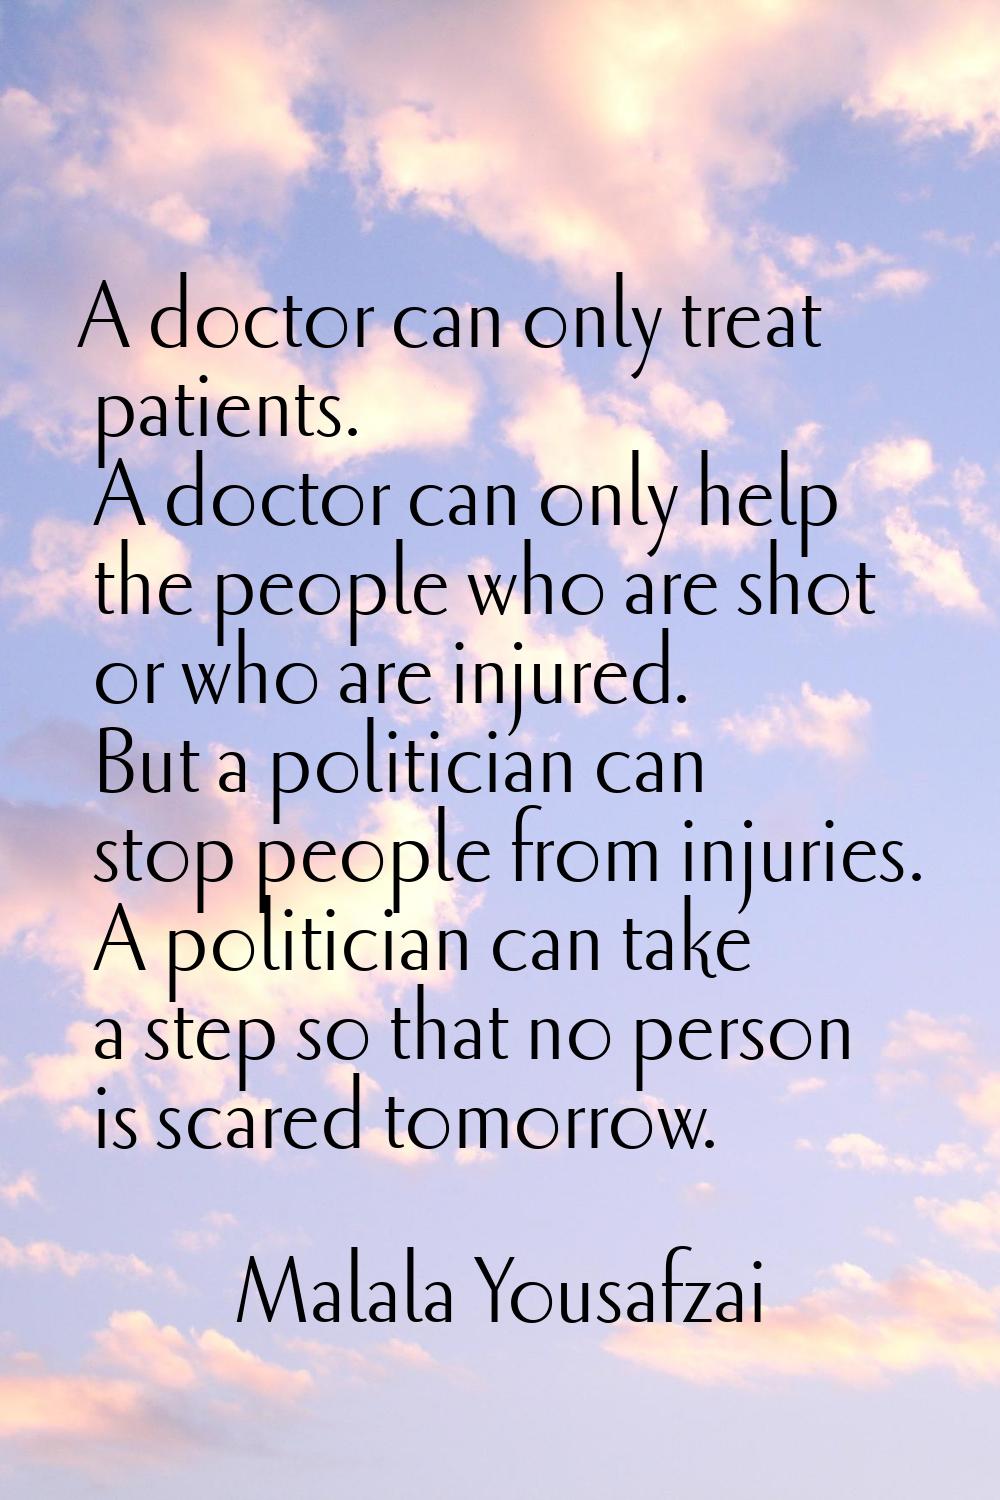 A doctor can only treat patients. A doctor can only help the people who are shot or who are injured